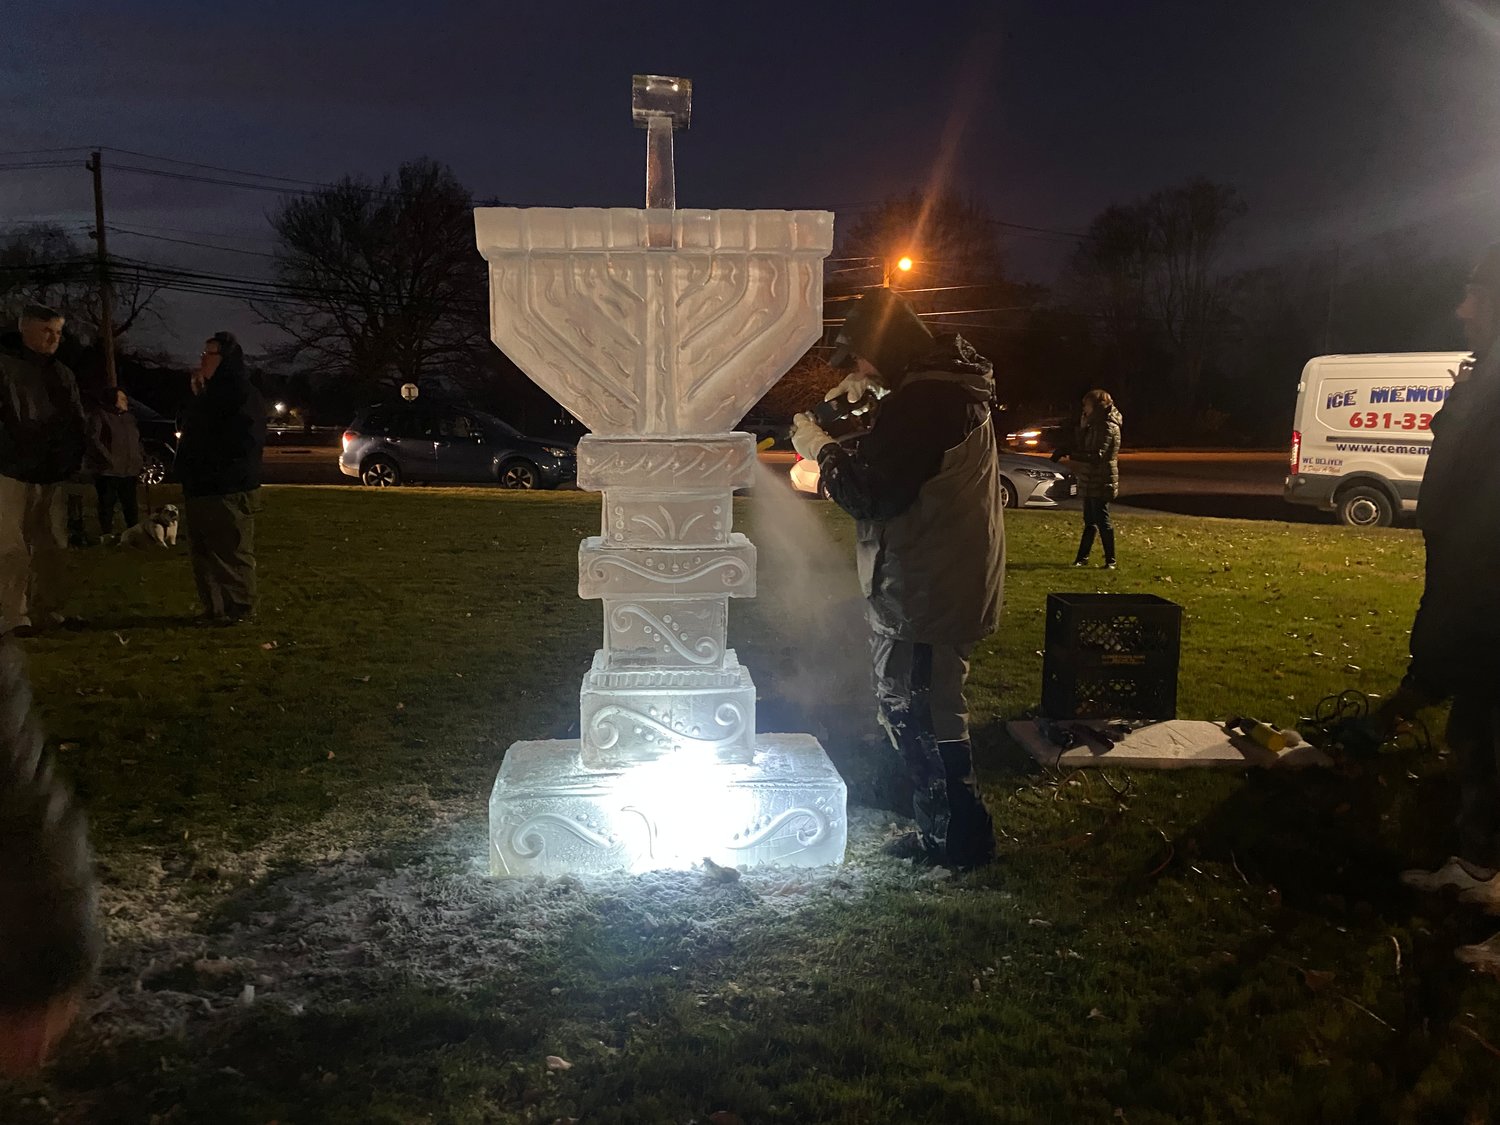 The finished ice menorah after being lit.